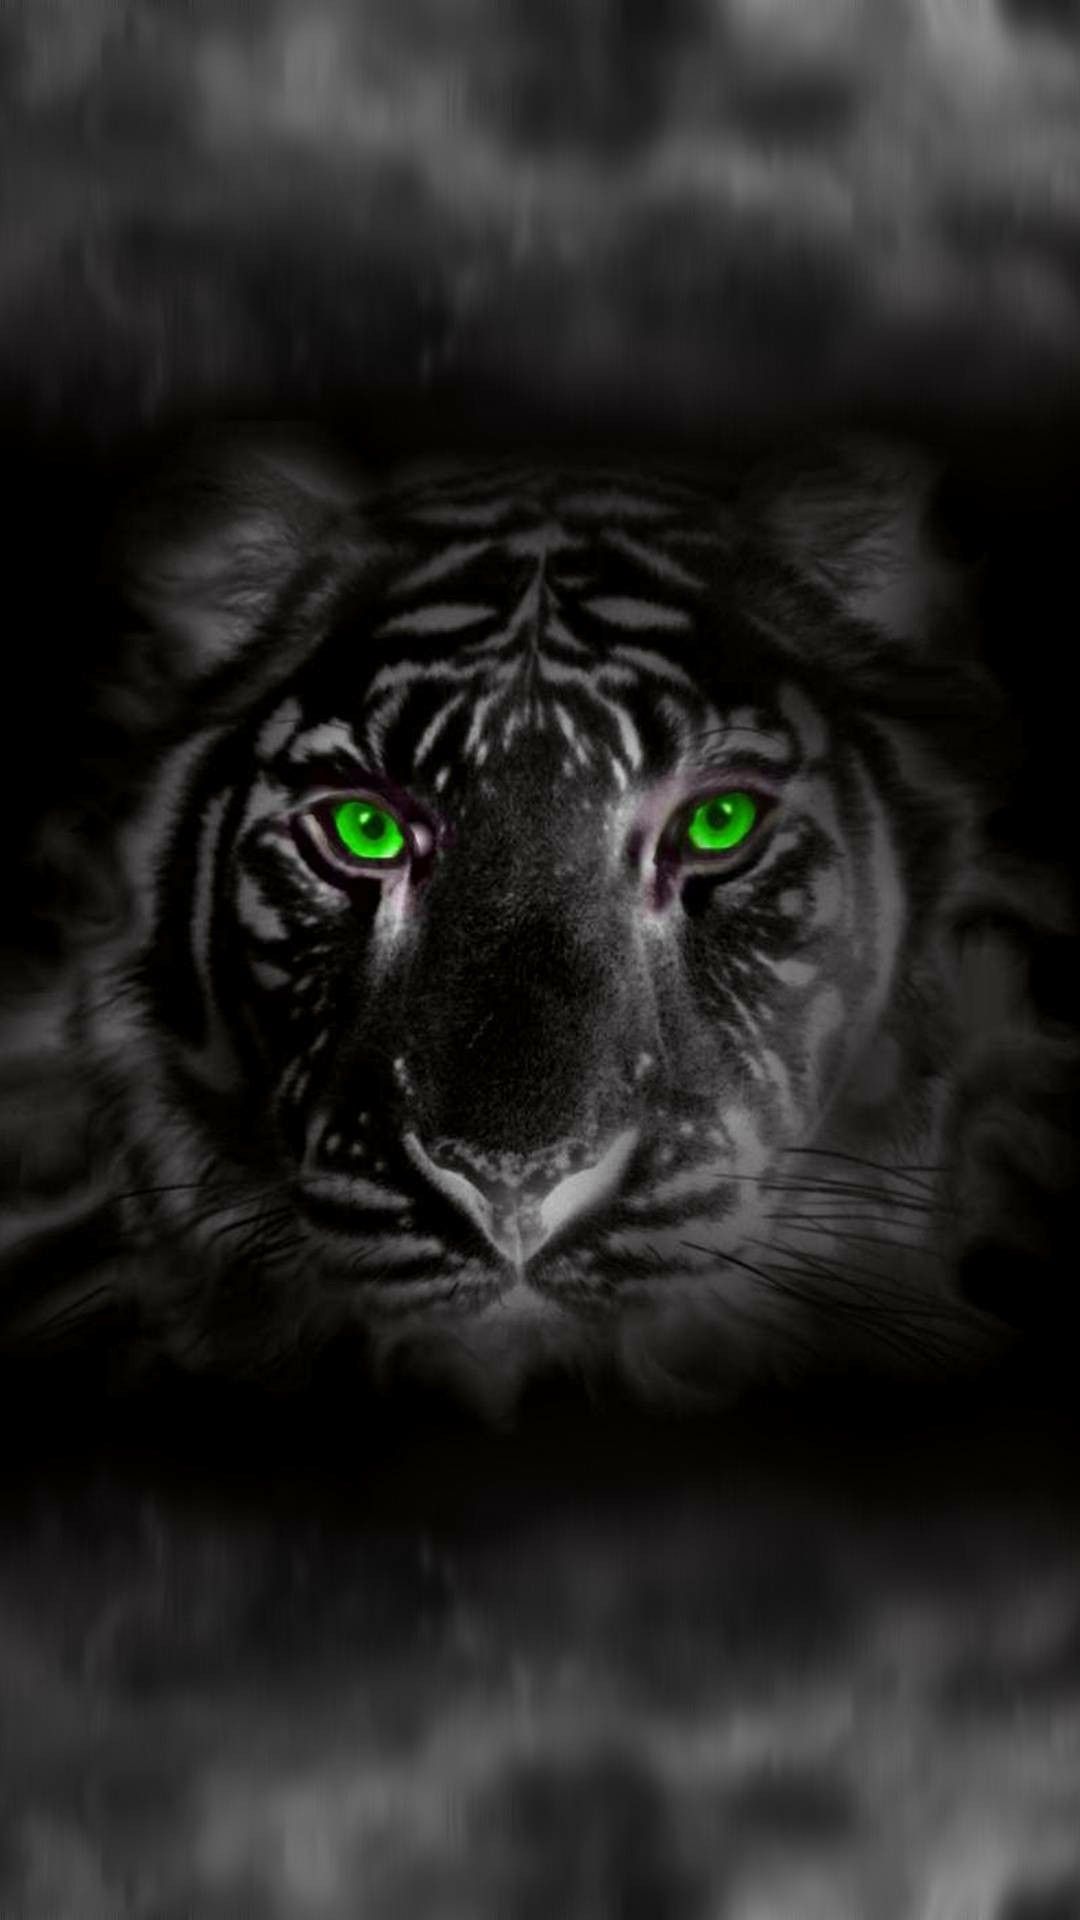 White Tiger With Green Eyes Big Cats Black Tigers Animals